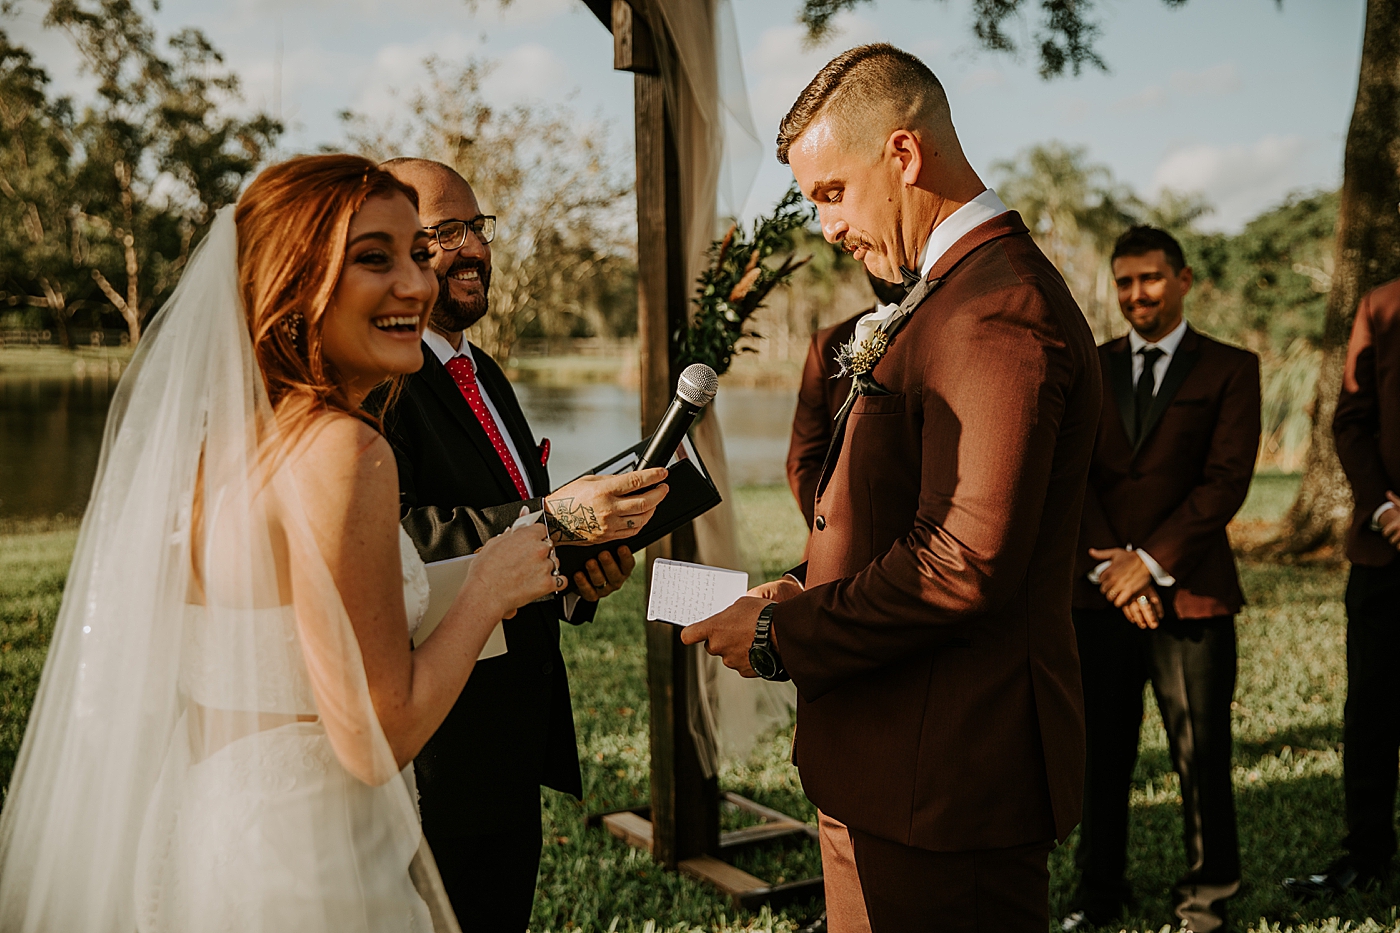 Groom giving vows Bride entering ceremony with father BMR Stables Wedding Photography captured by South Florida Wedding Photographer Maggie Alvarez Photography